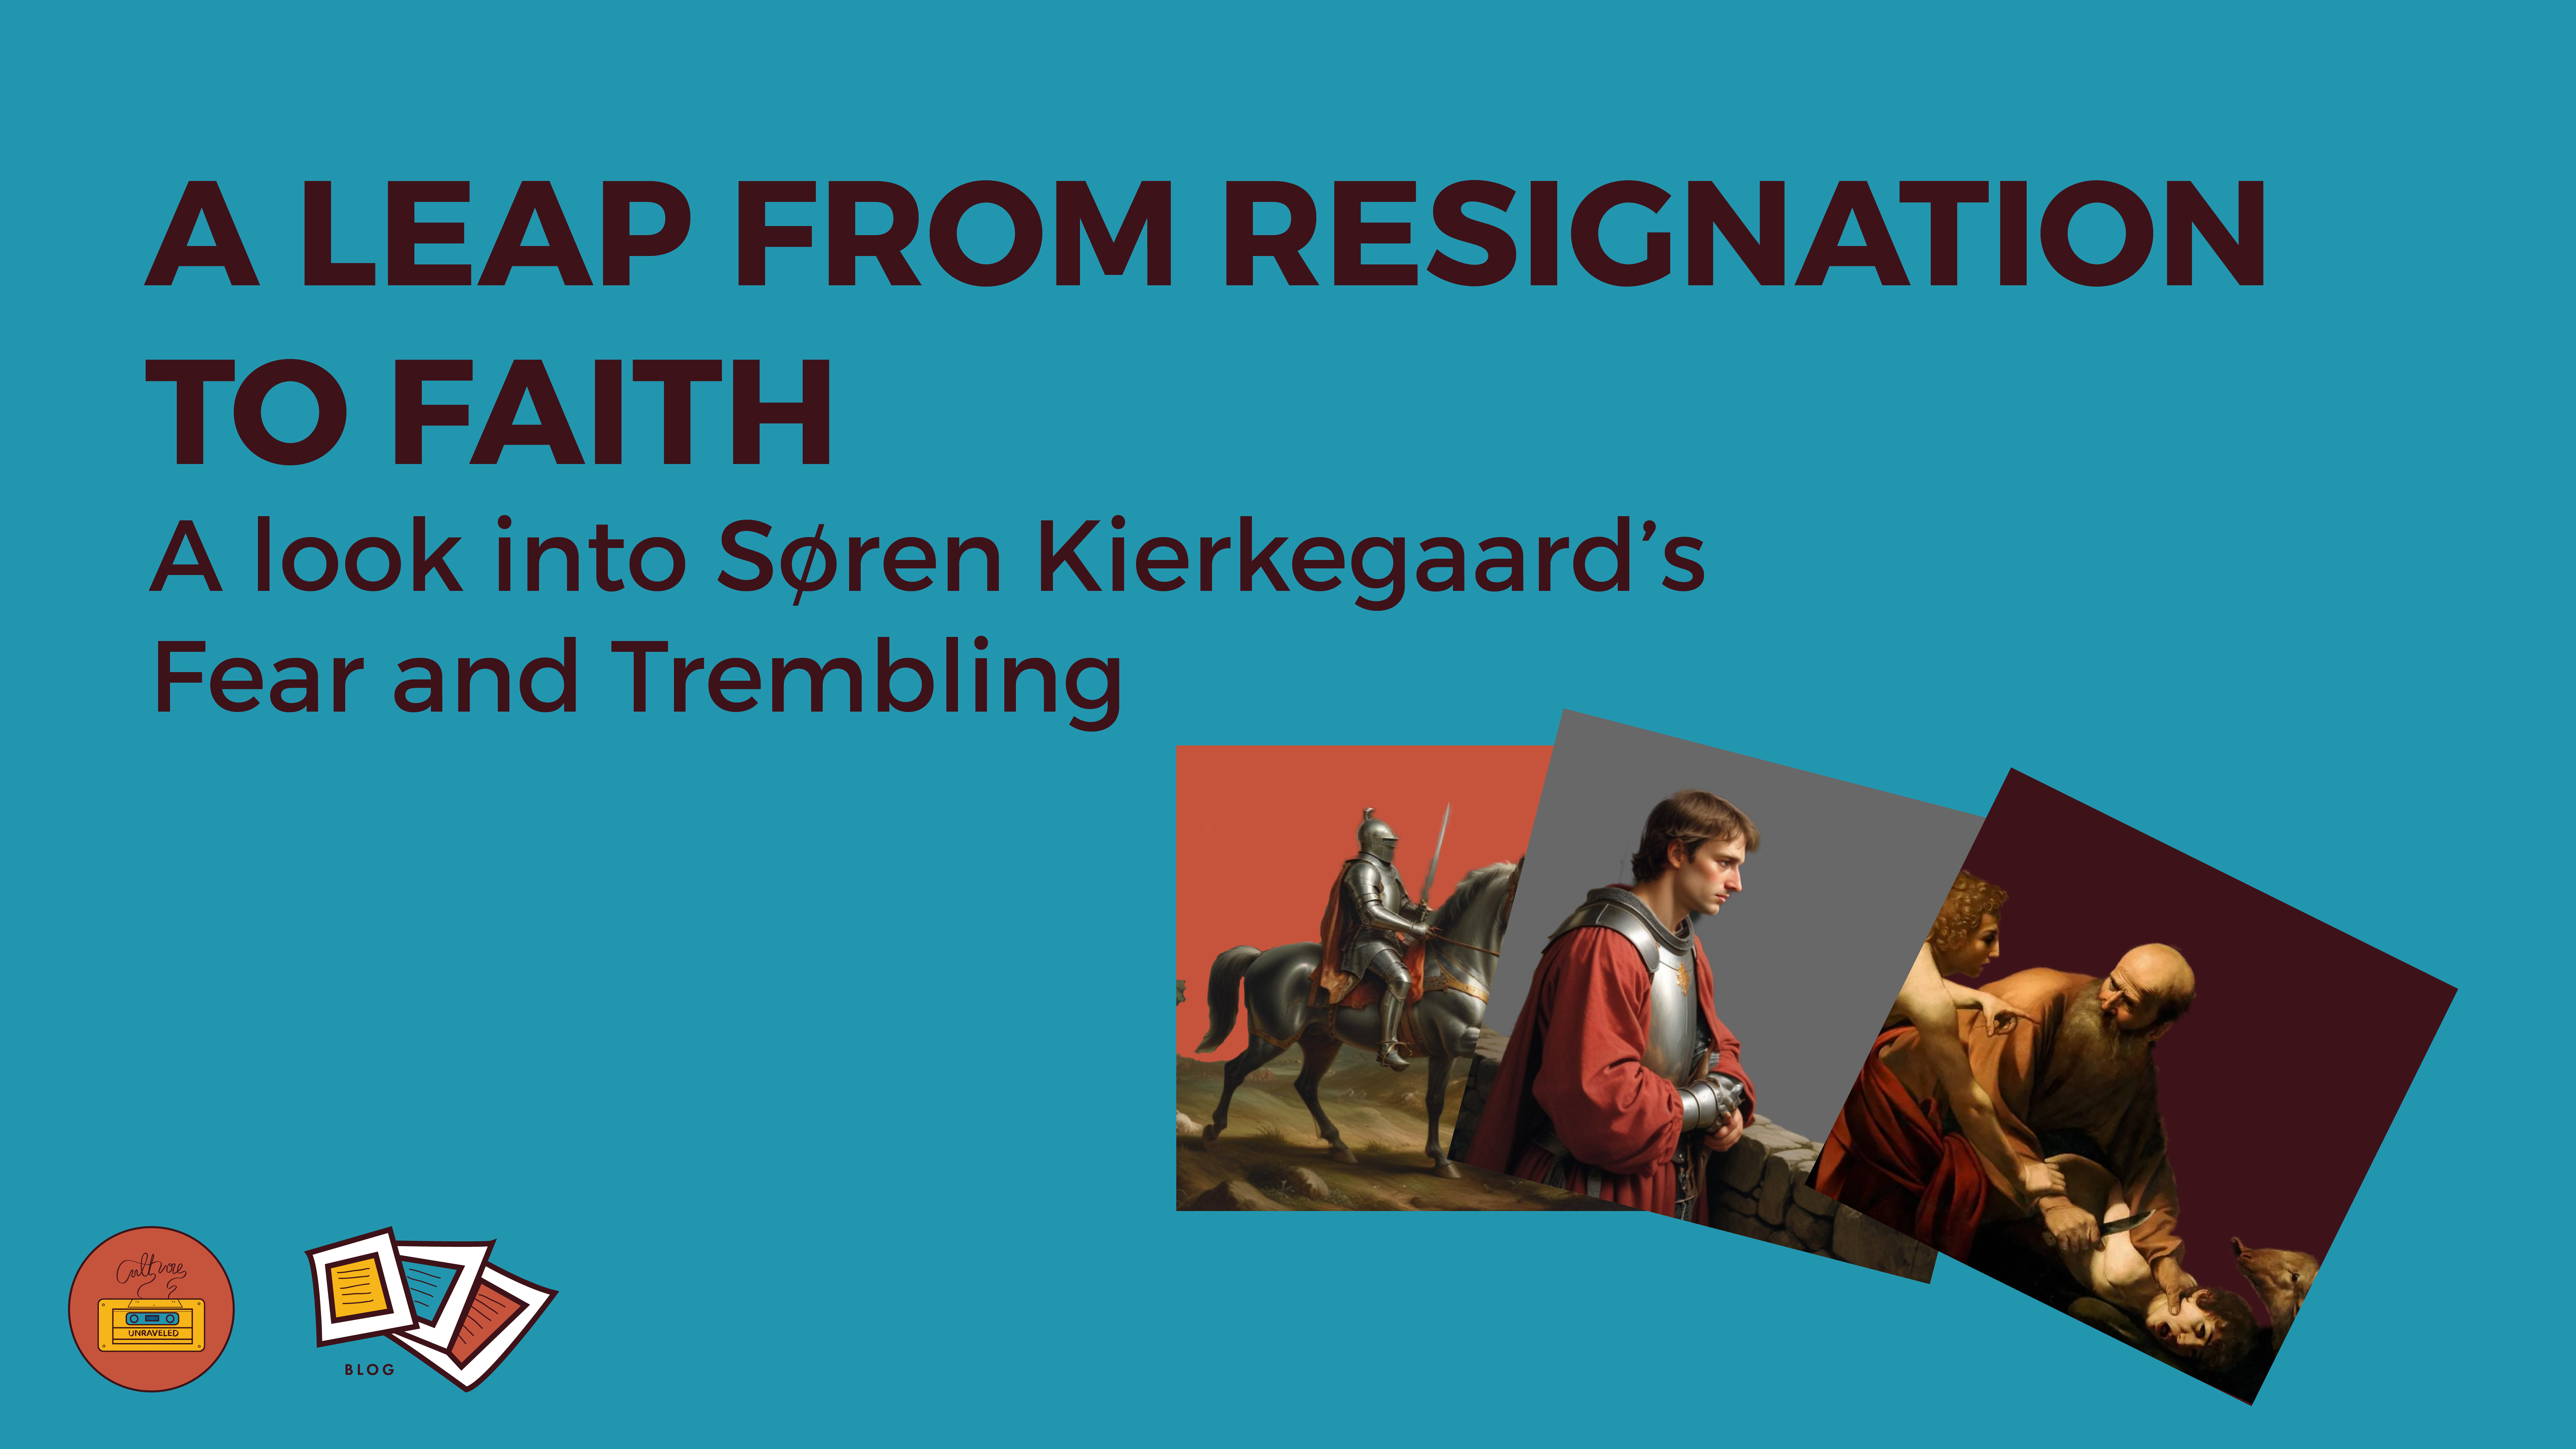 A Leap from Resignation to Faith – A look into Søren Kierkegaard’s Fear and Trembling